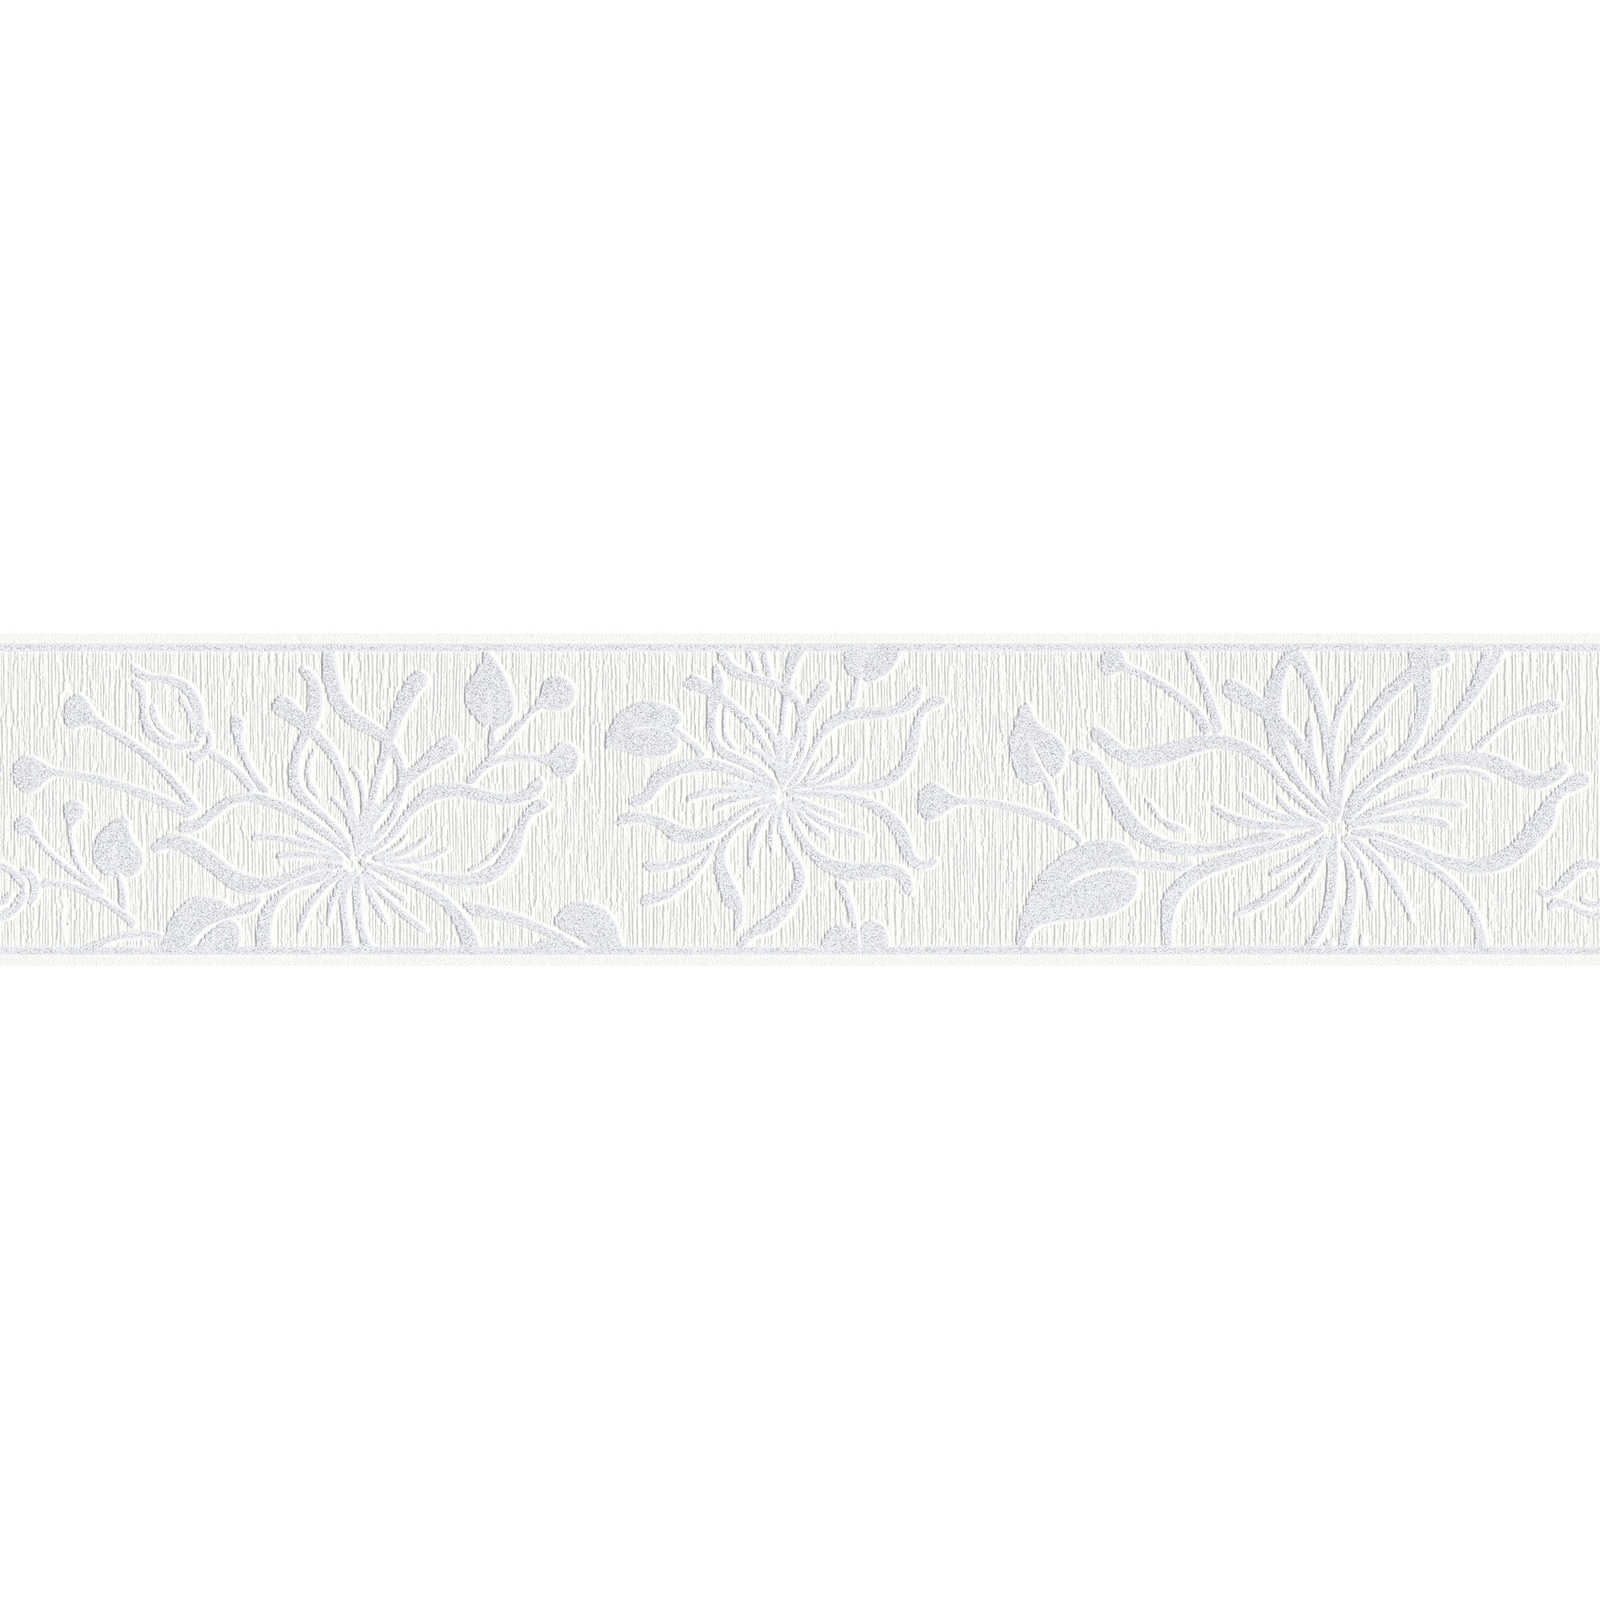         Wallpaper border white with floral pattern & texture design
    